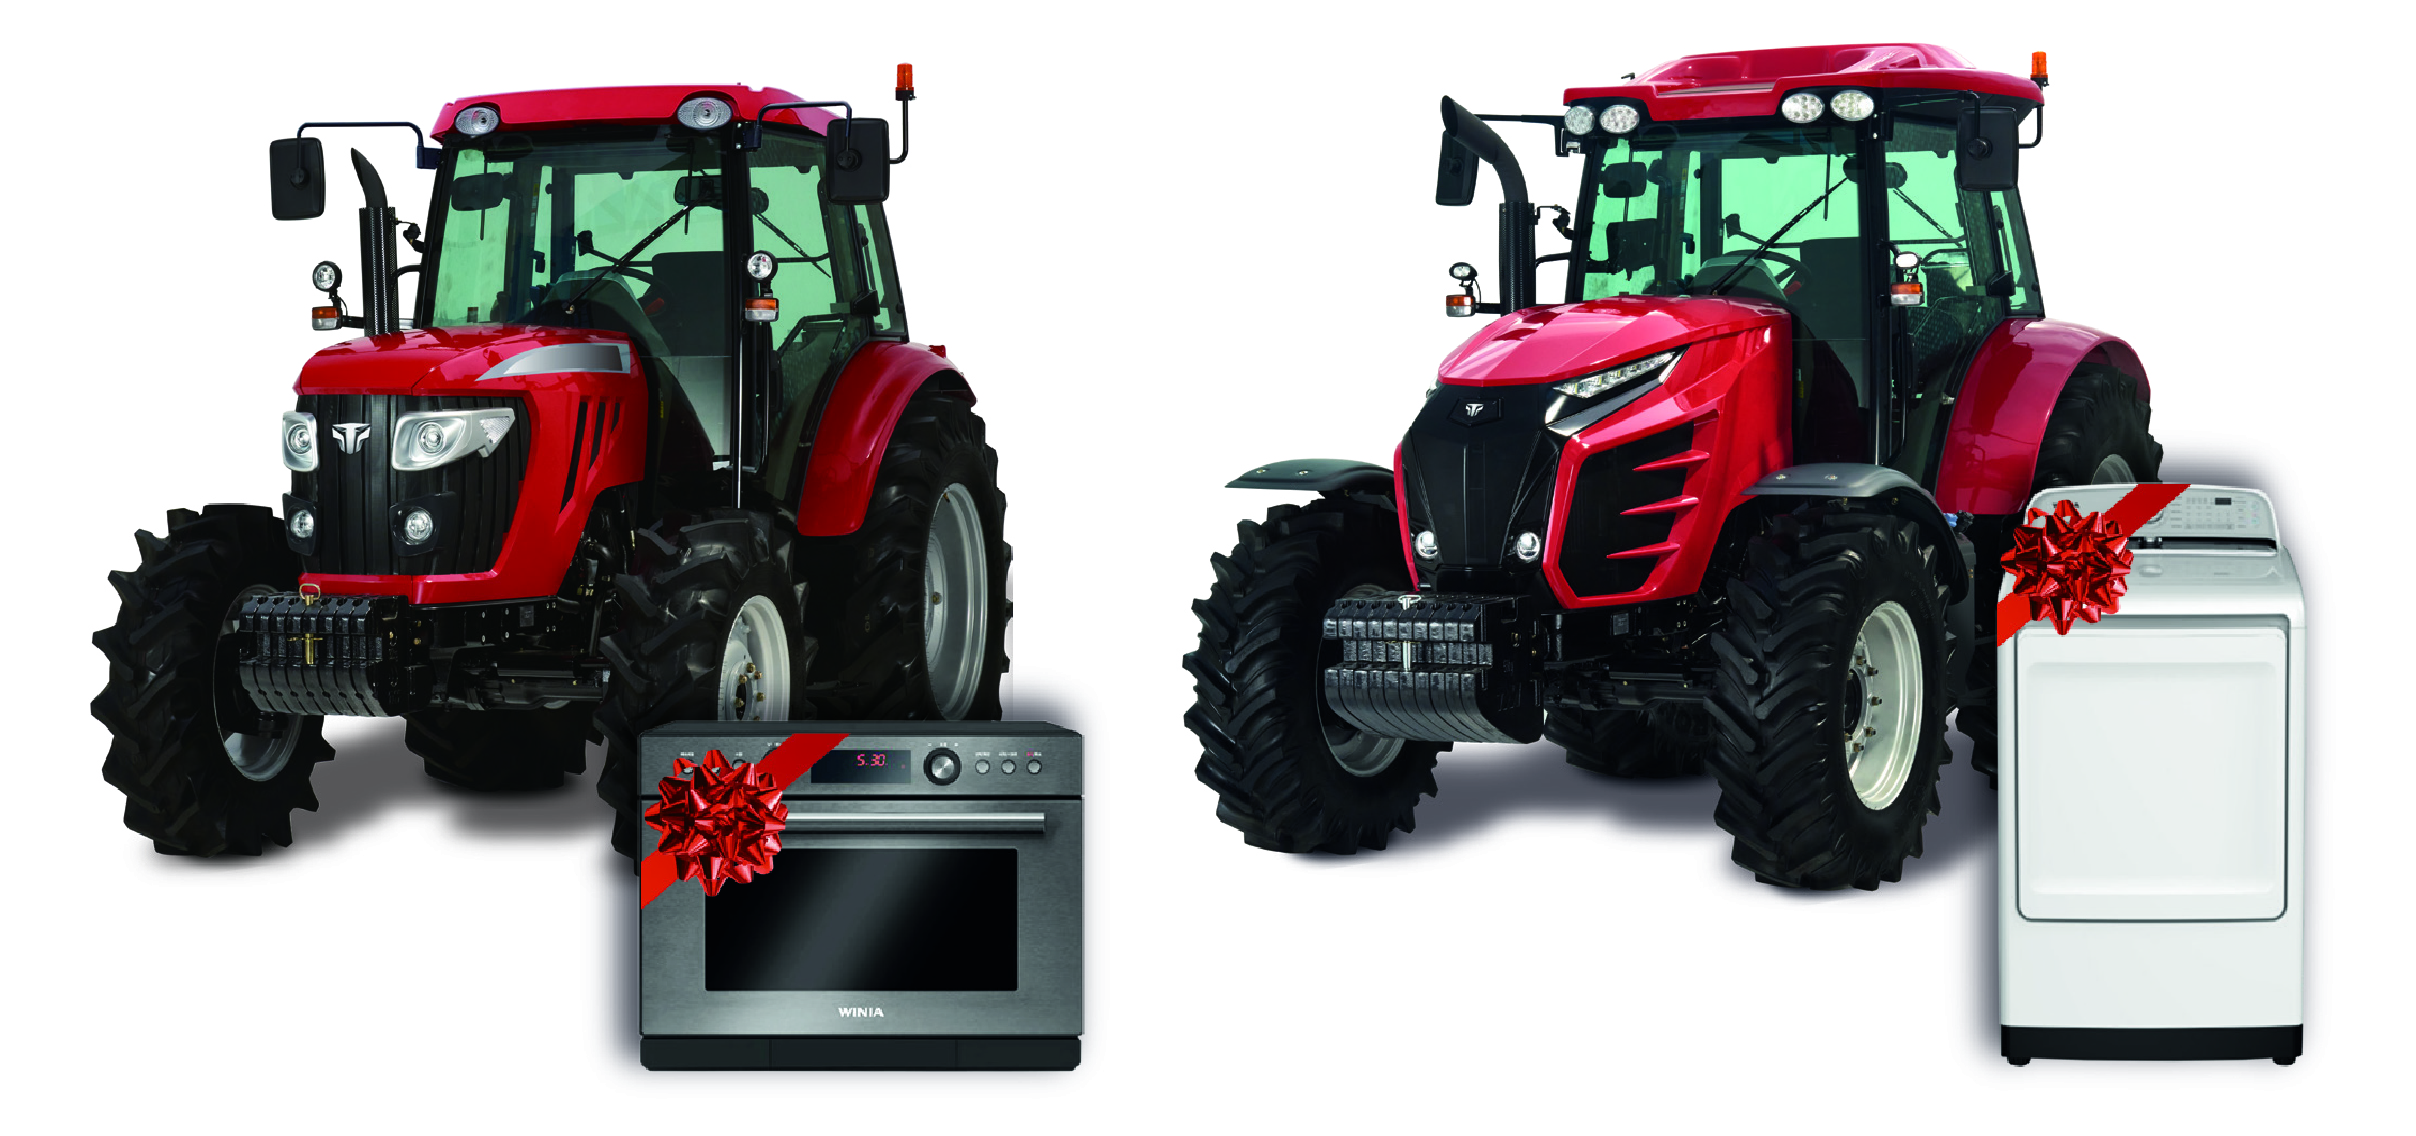 Exclusive promotion announced for farm machinery in Korea